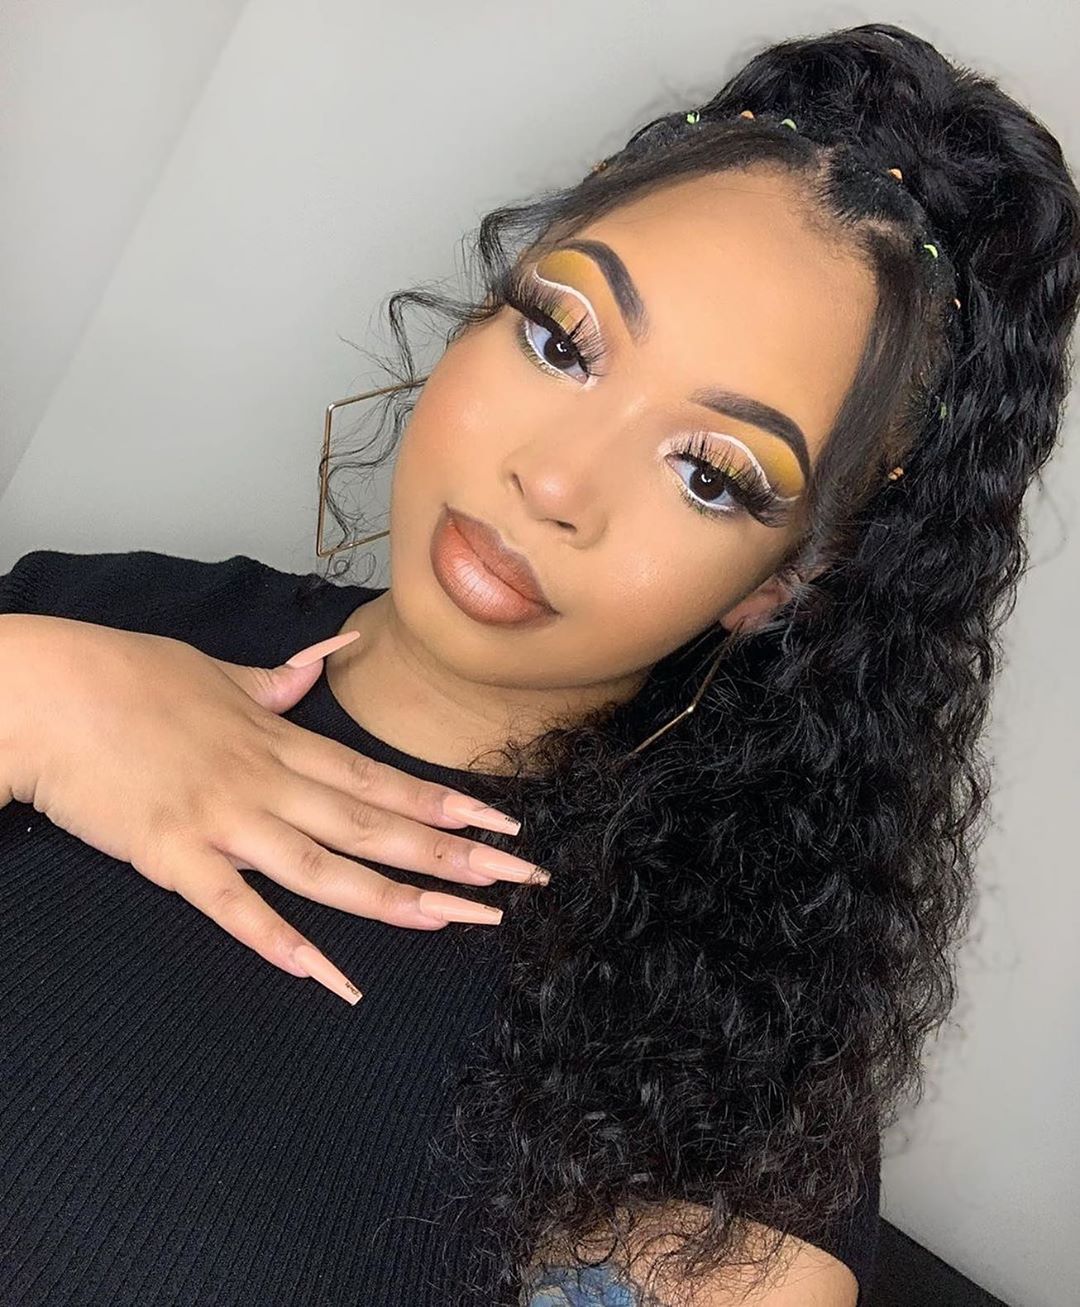 Anastasia Beverly Hills - So flawless @slaybyciara slayed her complexion using our Luminous Foundation in shade 355N 

#anastasiabeverlyhills